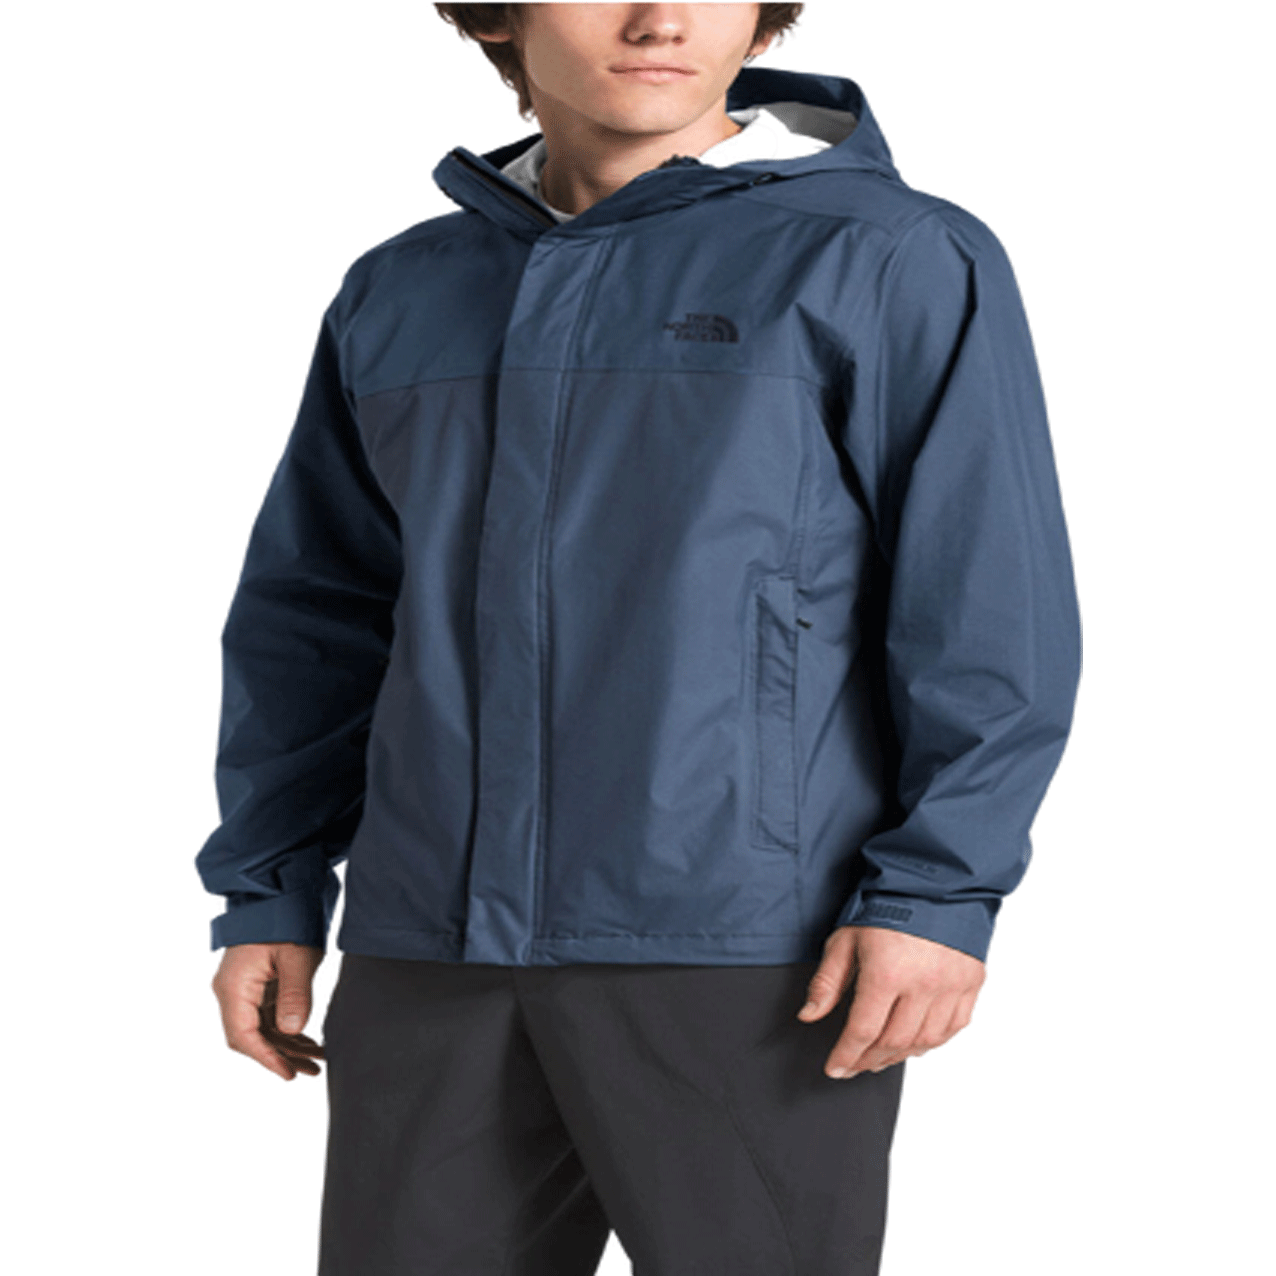 THE NORTH FACE  VENTURE 2 JACKET NAVY NF0A2XTBMLF